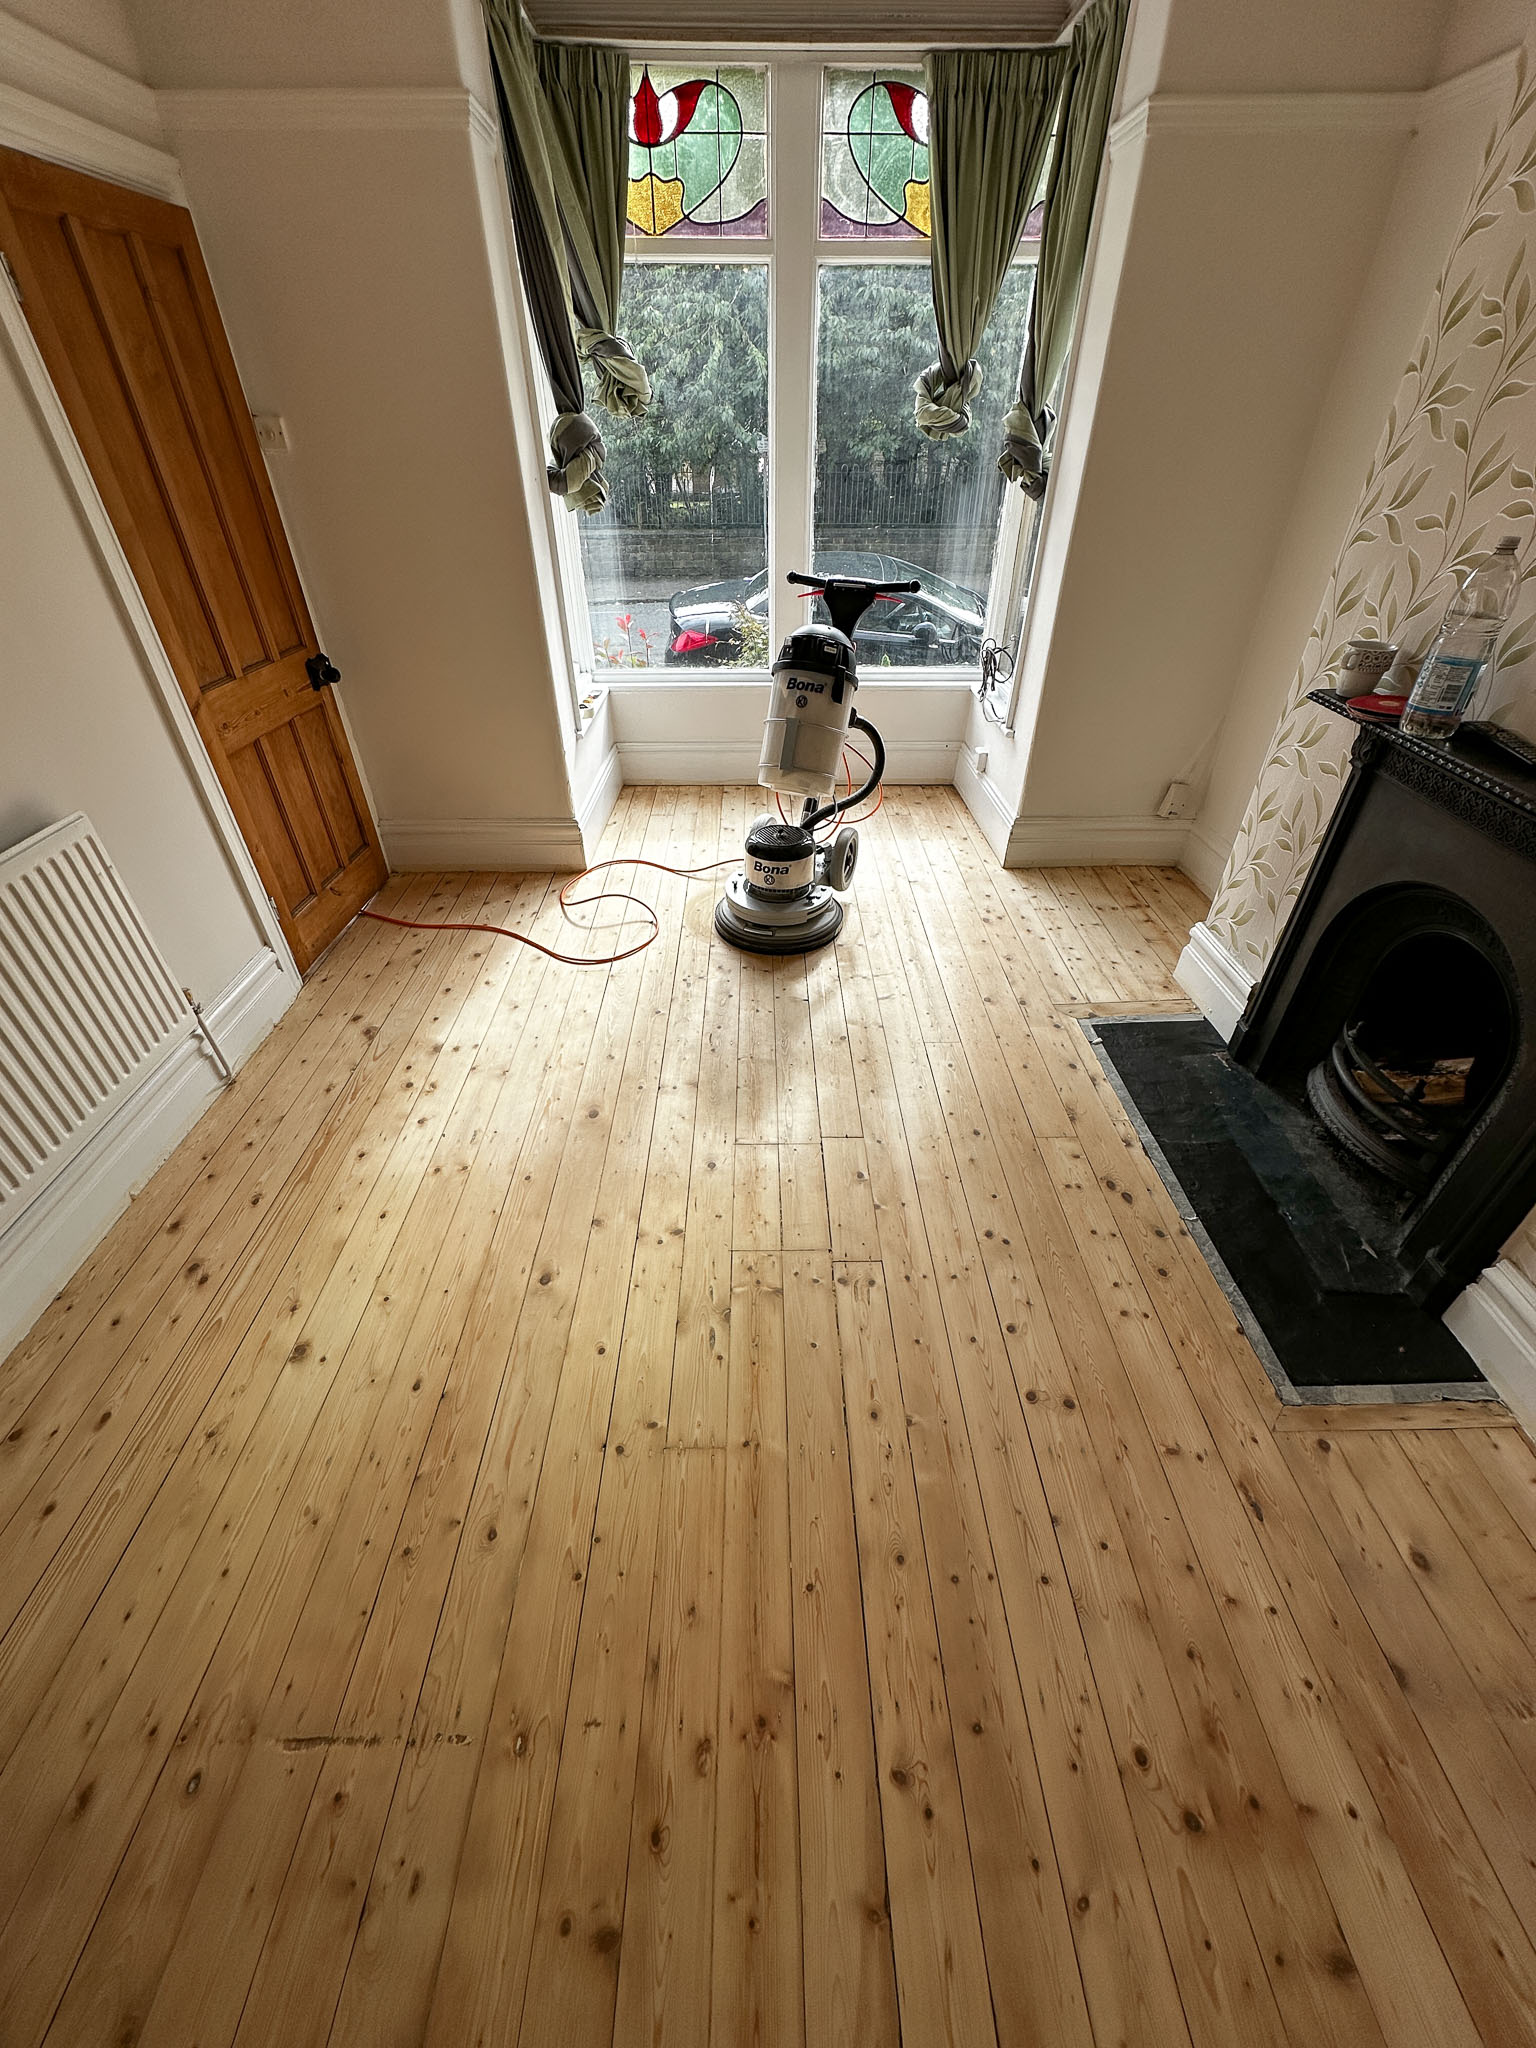 Floor sanding services with dust free equipment